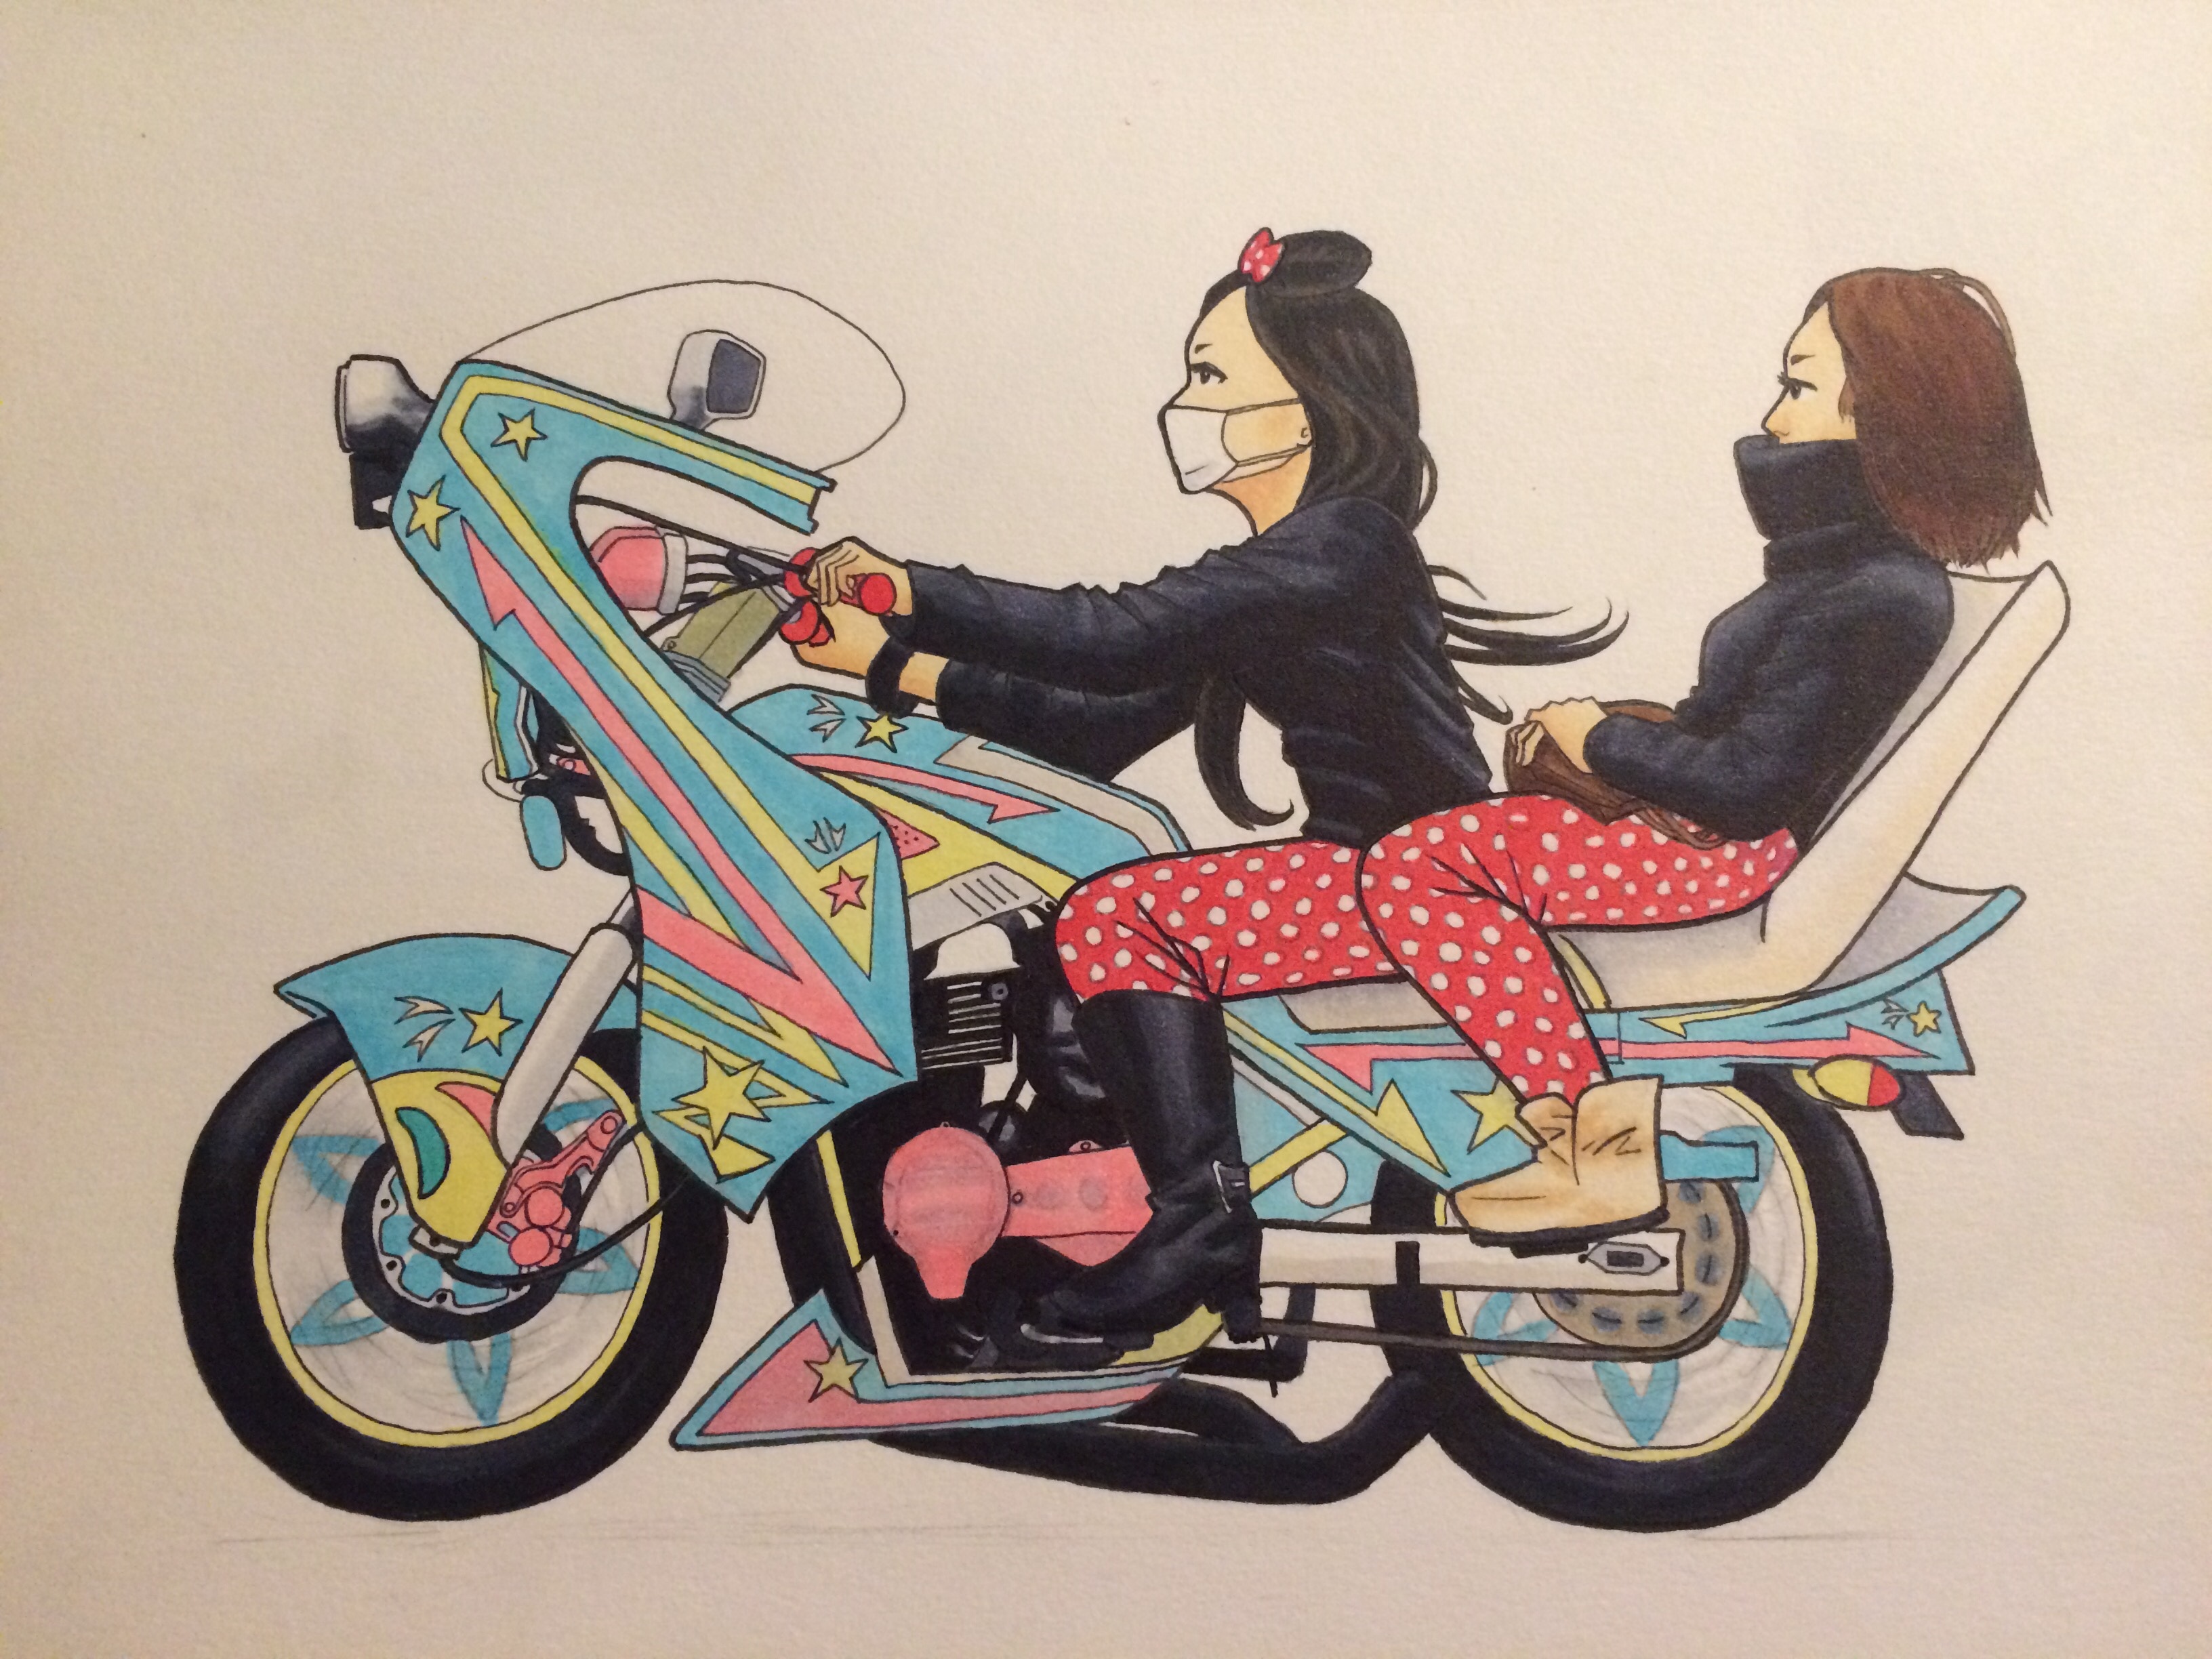 A drawing in markers of two women riding a motorcycle.